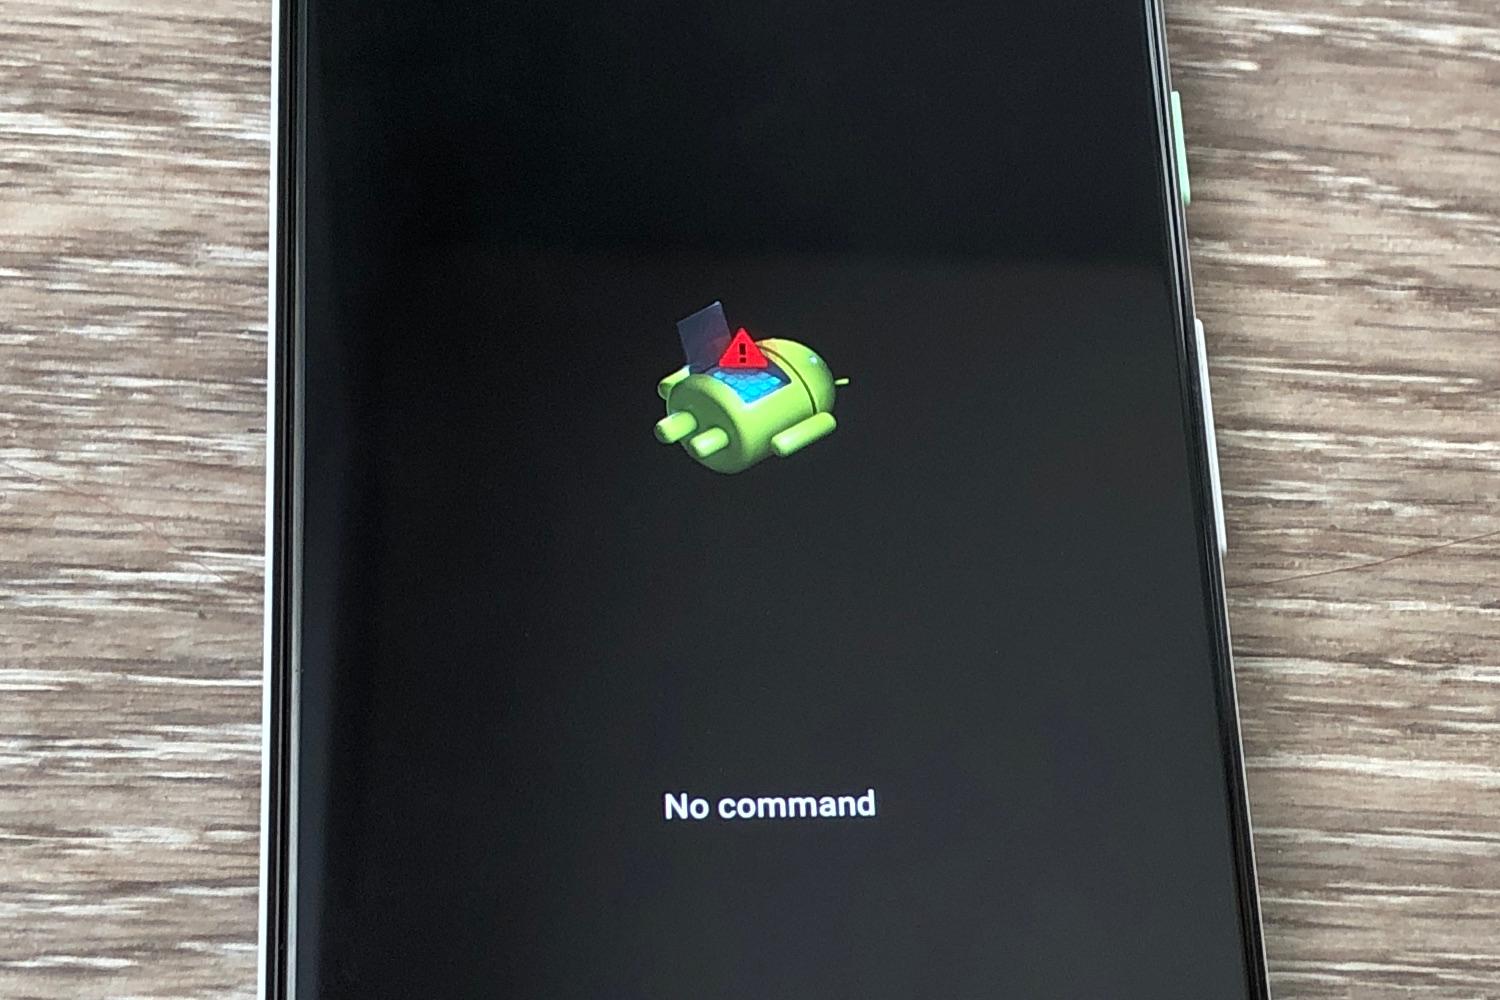 Pixel 3 recovery mode